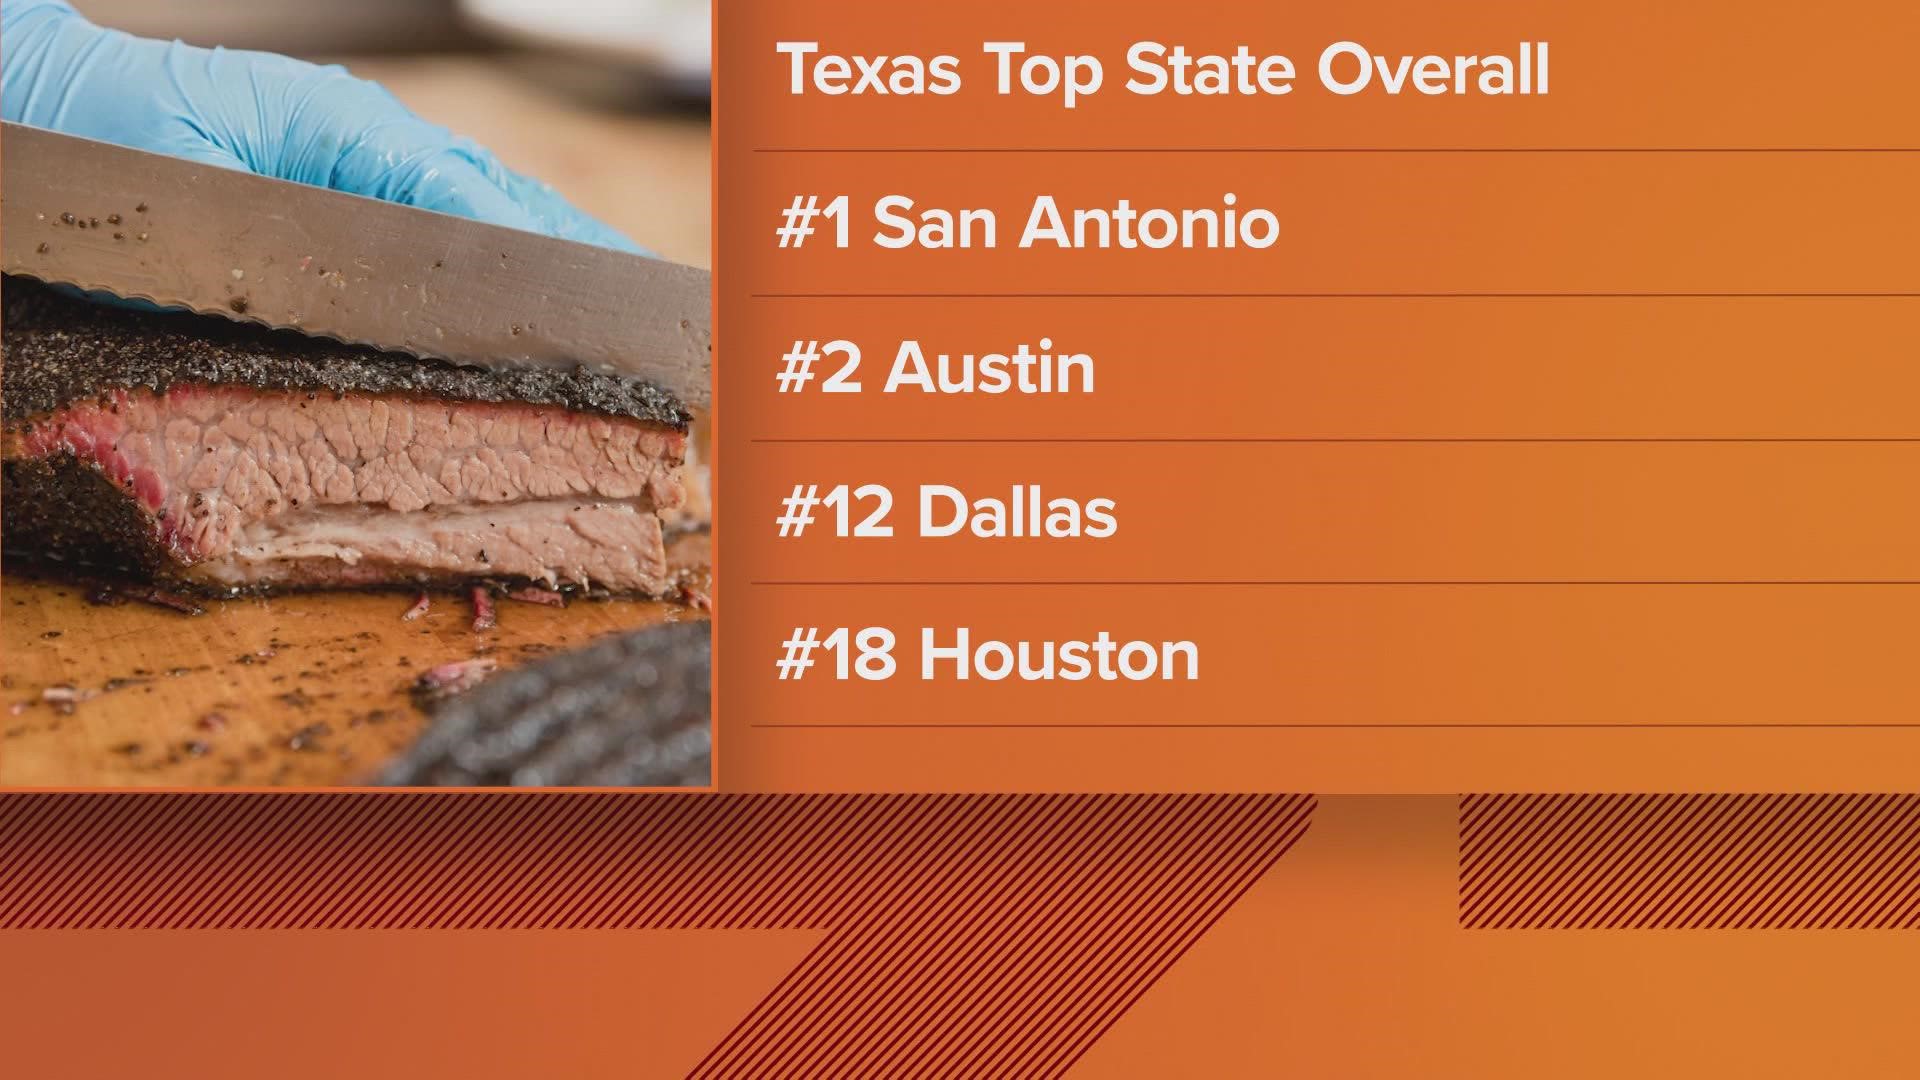 The company Clever made sure to list Texas as the best BBQ state, but their top two BBQ cities aren't the two you'd expect.